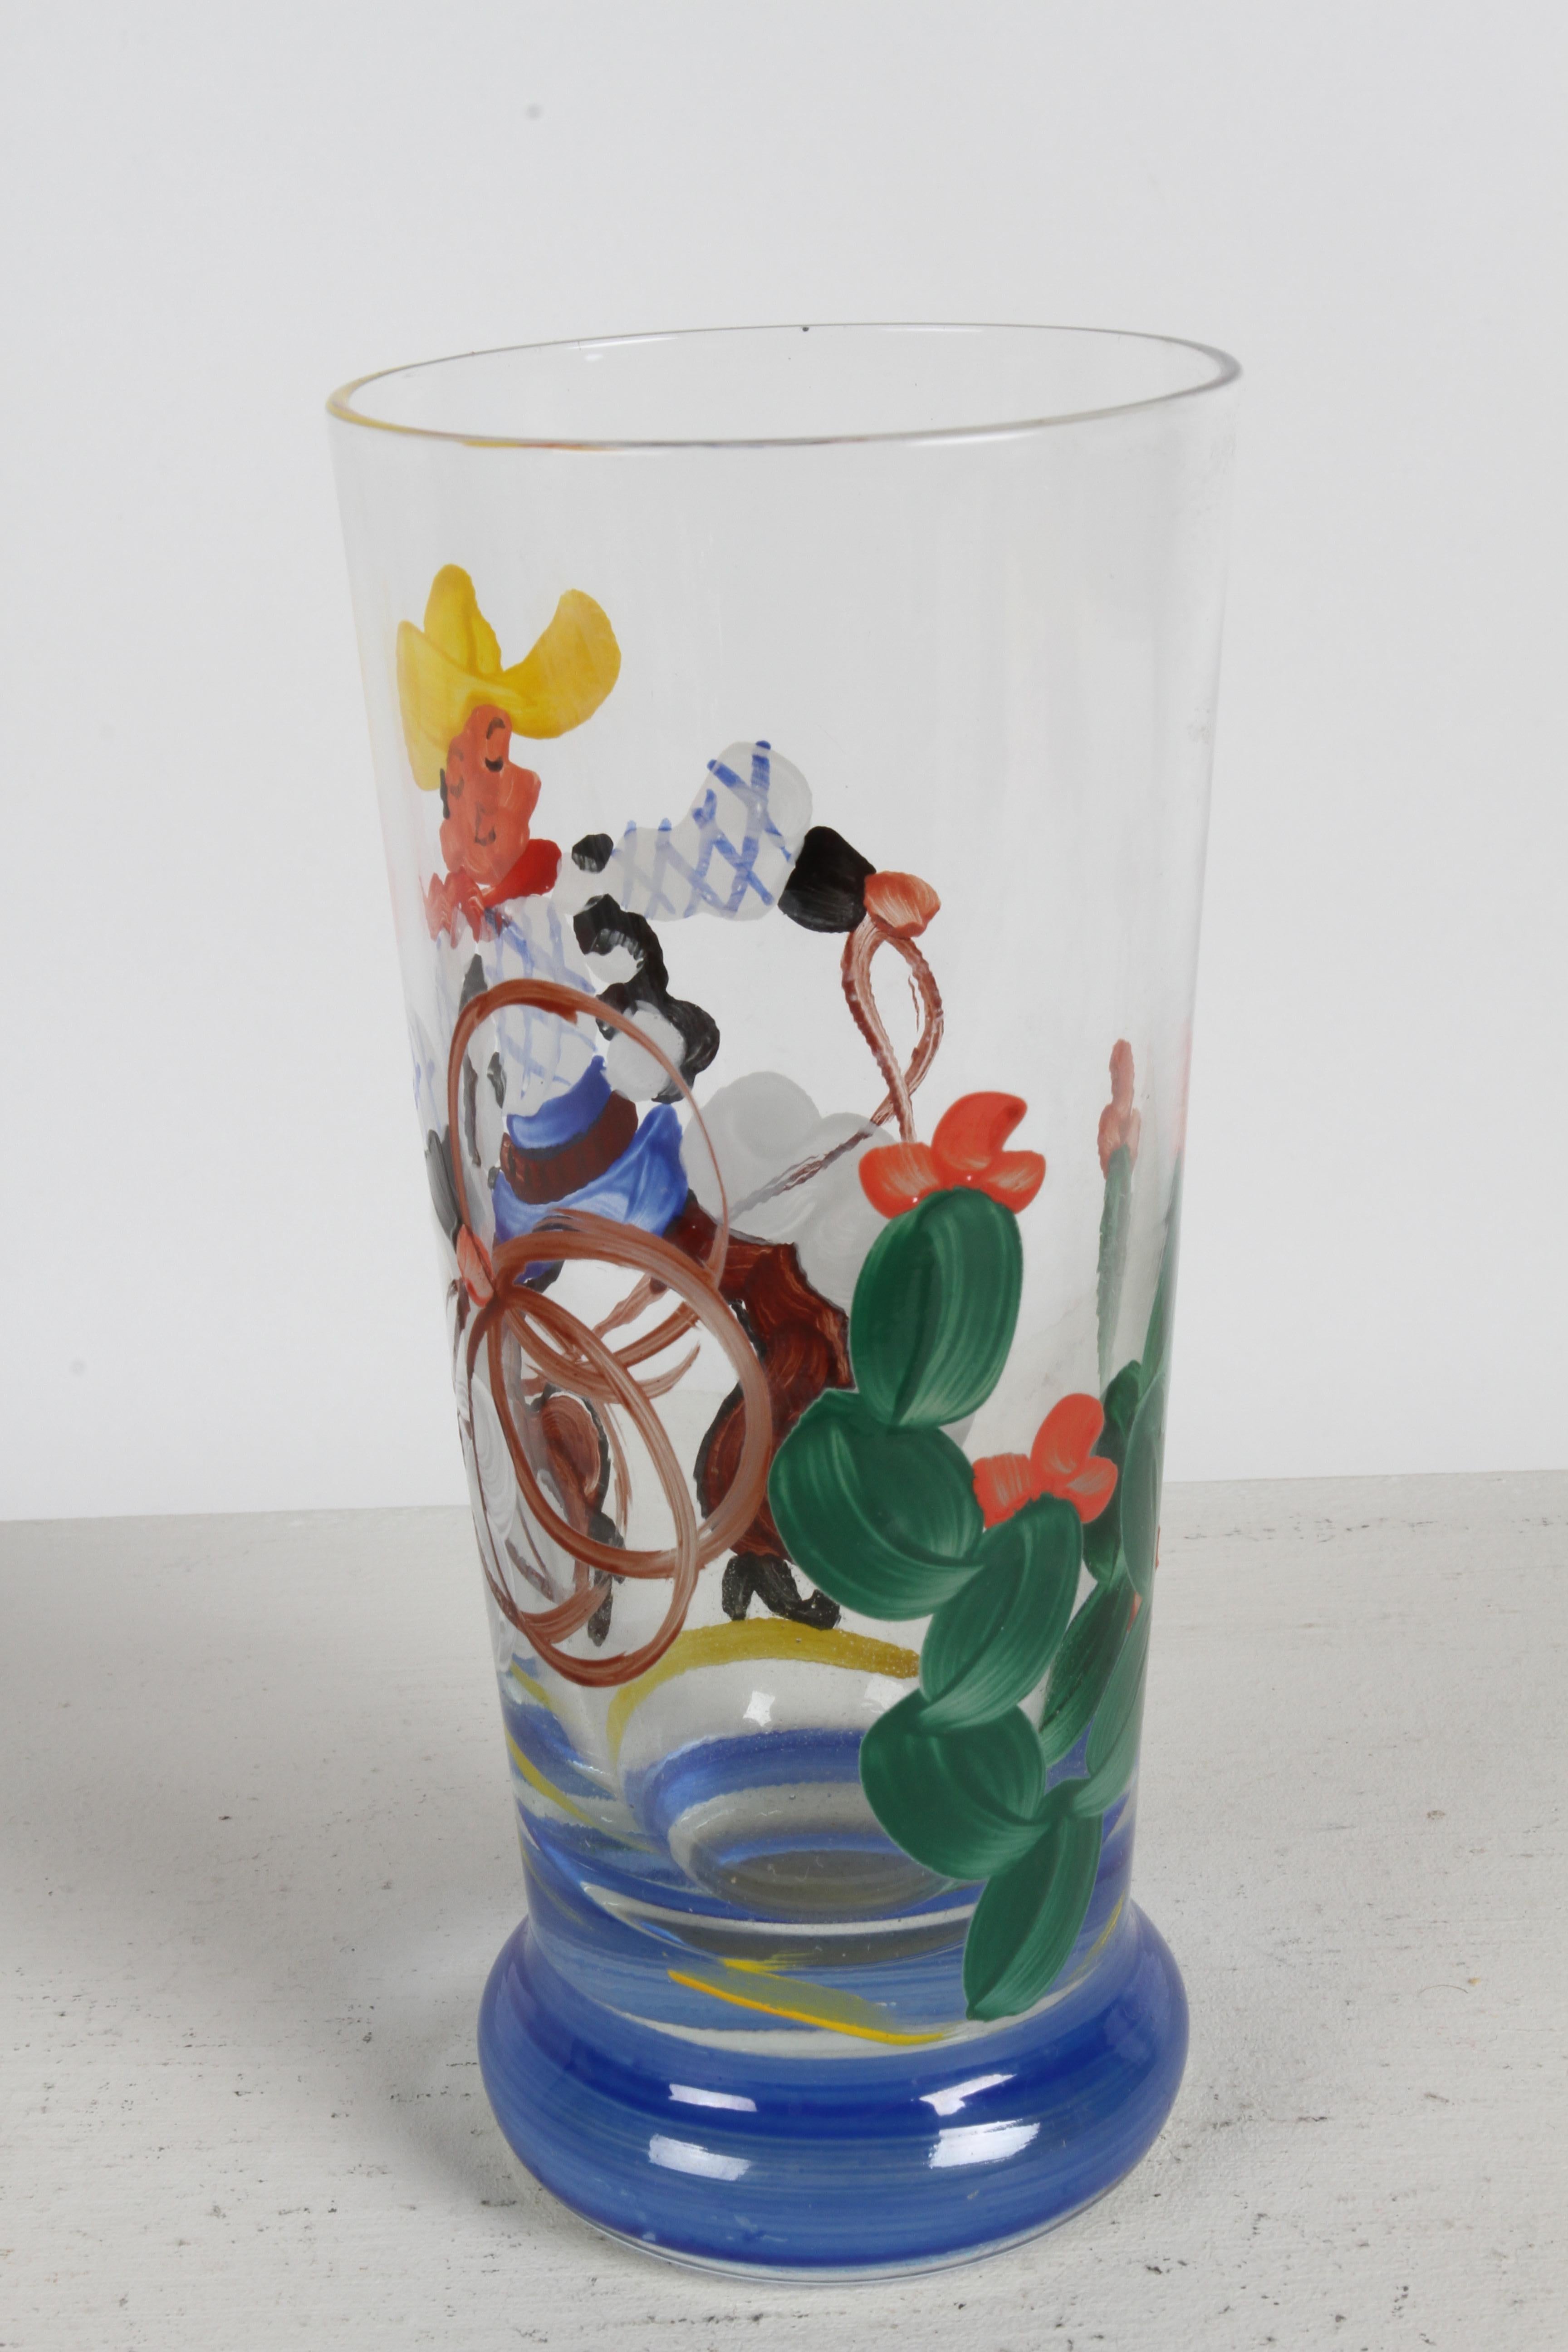 1940s Artist Hand-Painted Bar Glasses with Cowboy, Lasso & Cactus Theme - Rita  For Sale 8